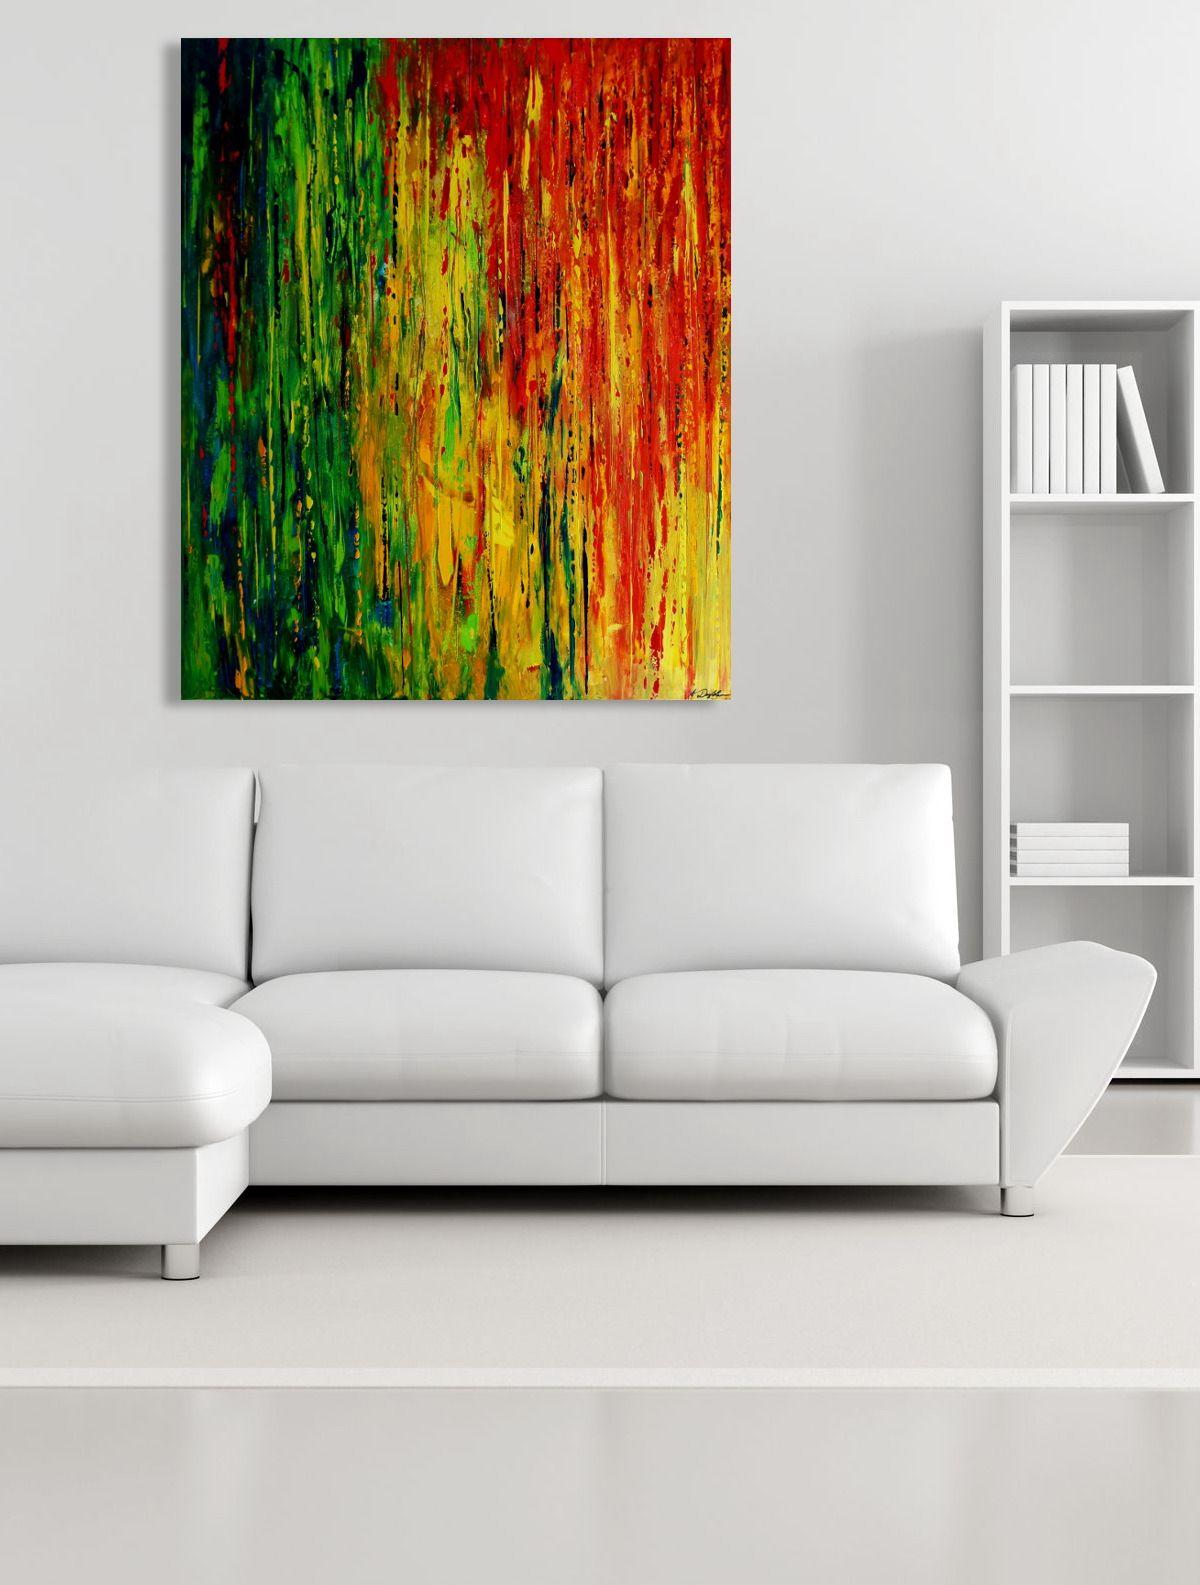 This large pallet-knife painting in acrylics on canvas comes in all colors of the rainbow, in a vertical dynamic like a summer rain that is both hot and refreshing. Enjoy!    Unique painting using high-quality acrylic colors on deep-edge gallery